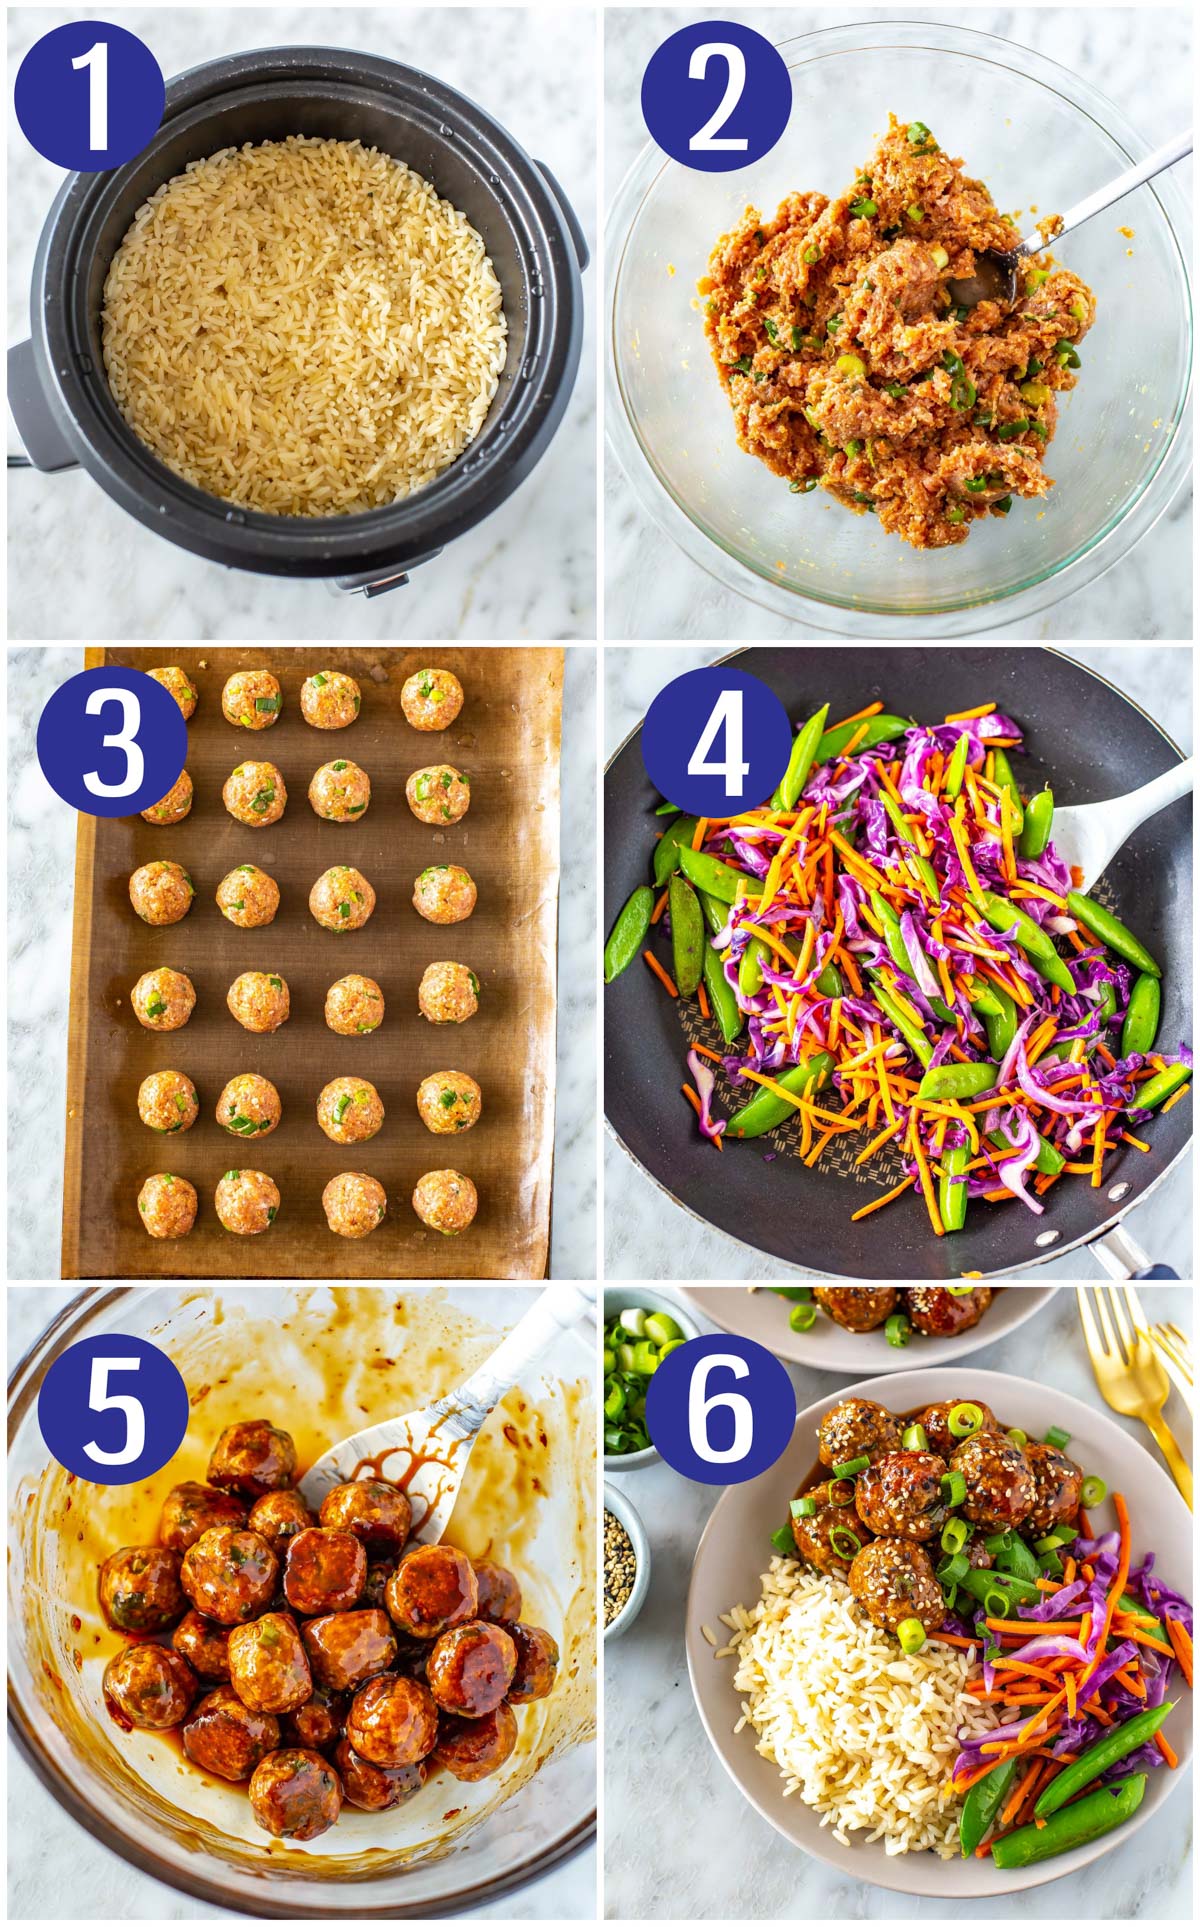 Step-by-step instructions collage for making teriyaki chicken meatballs: make rice, make meatball mixture, form meatballs, cook veggies, toss cooked meatballs with sauce, serve meatballs with rice and veggies.